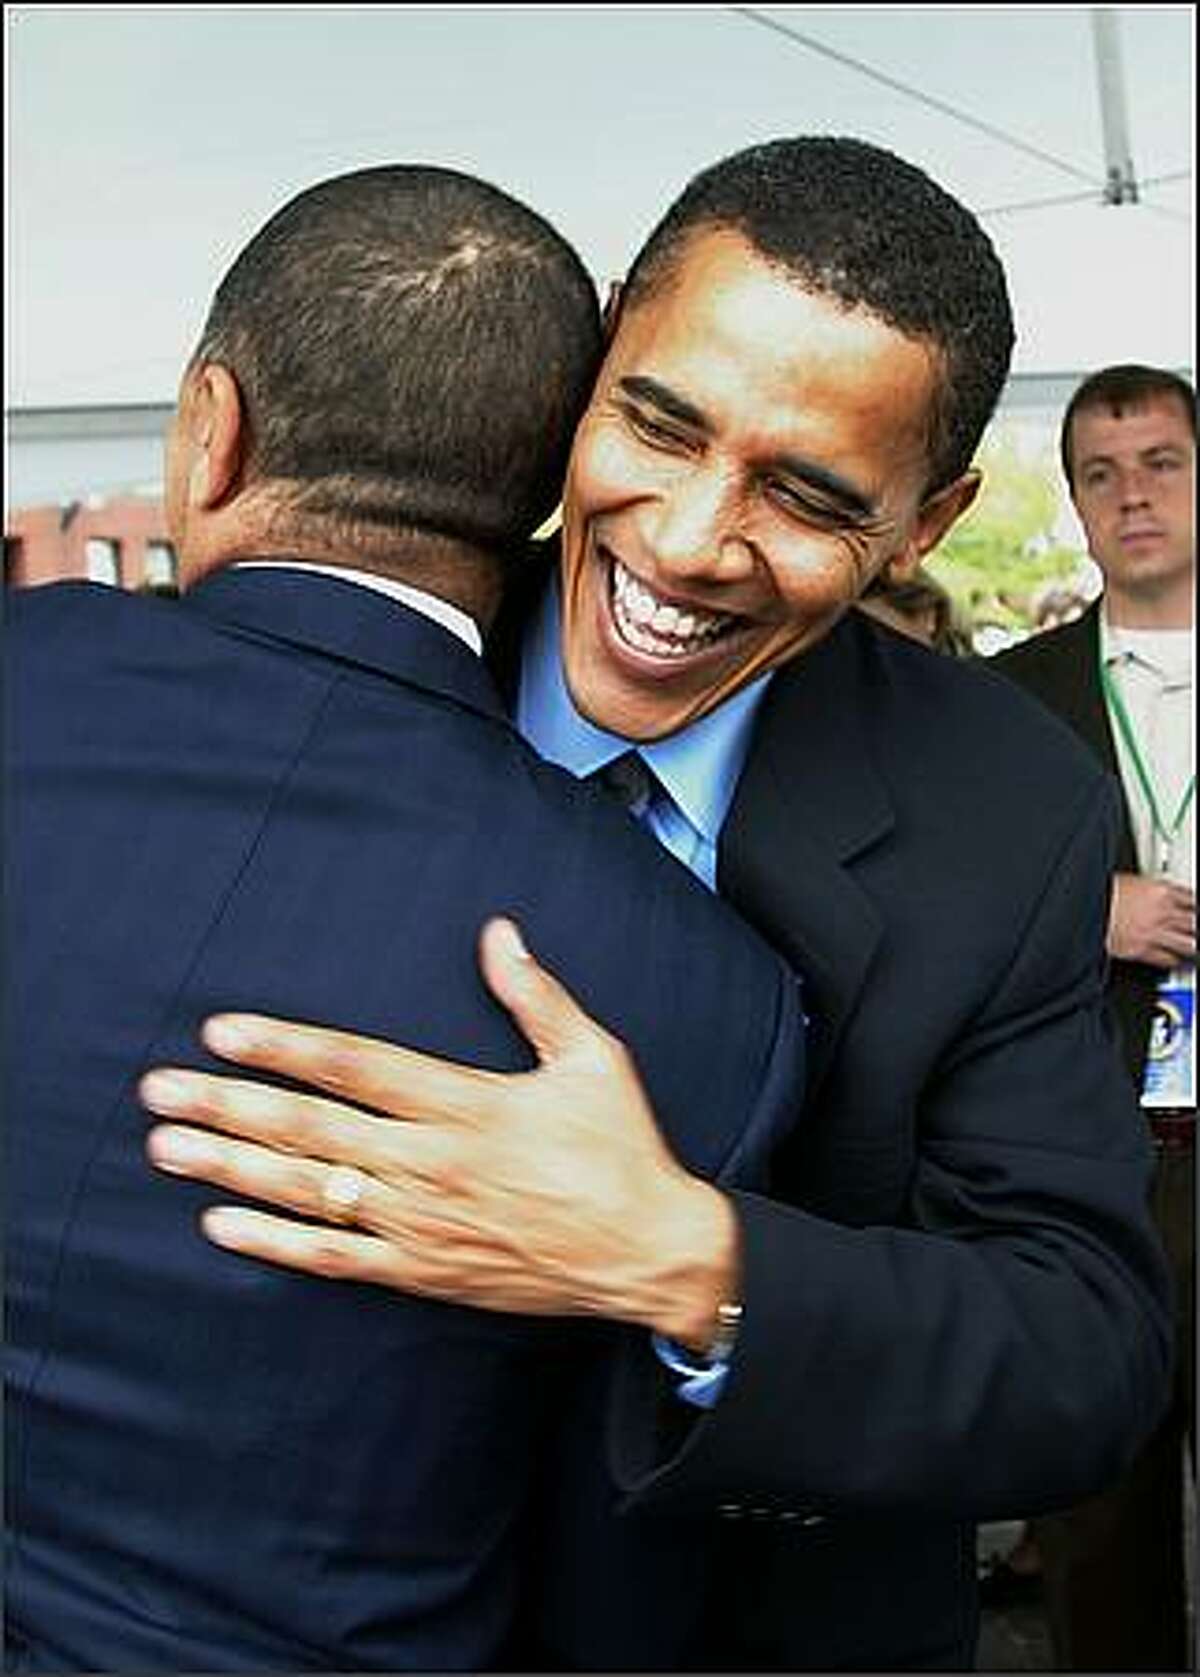 July 27, 2004. Democratic Convention Keynote speaker and Illinois Senate candidate Barack Obama hugs a supporter before speaking at the League of Conservation Voters Environmental Victory Rally at Christopher Columbus Park in Boston, Massachusetts. Democratic presidential candidate U.S. Senator John Kerry (D-MA) is expected to accept his party's nomination later in the week. (Photo by Mario Tama/Getty Images)